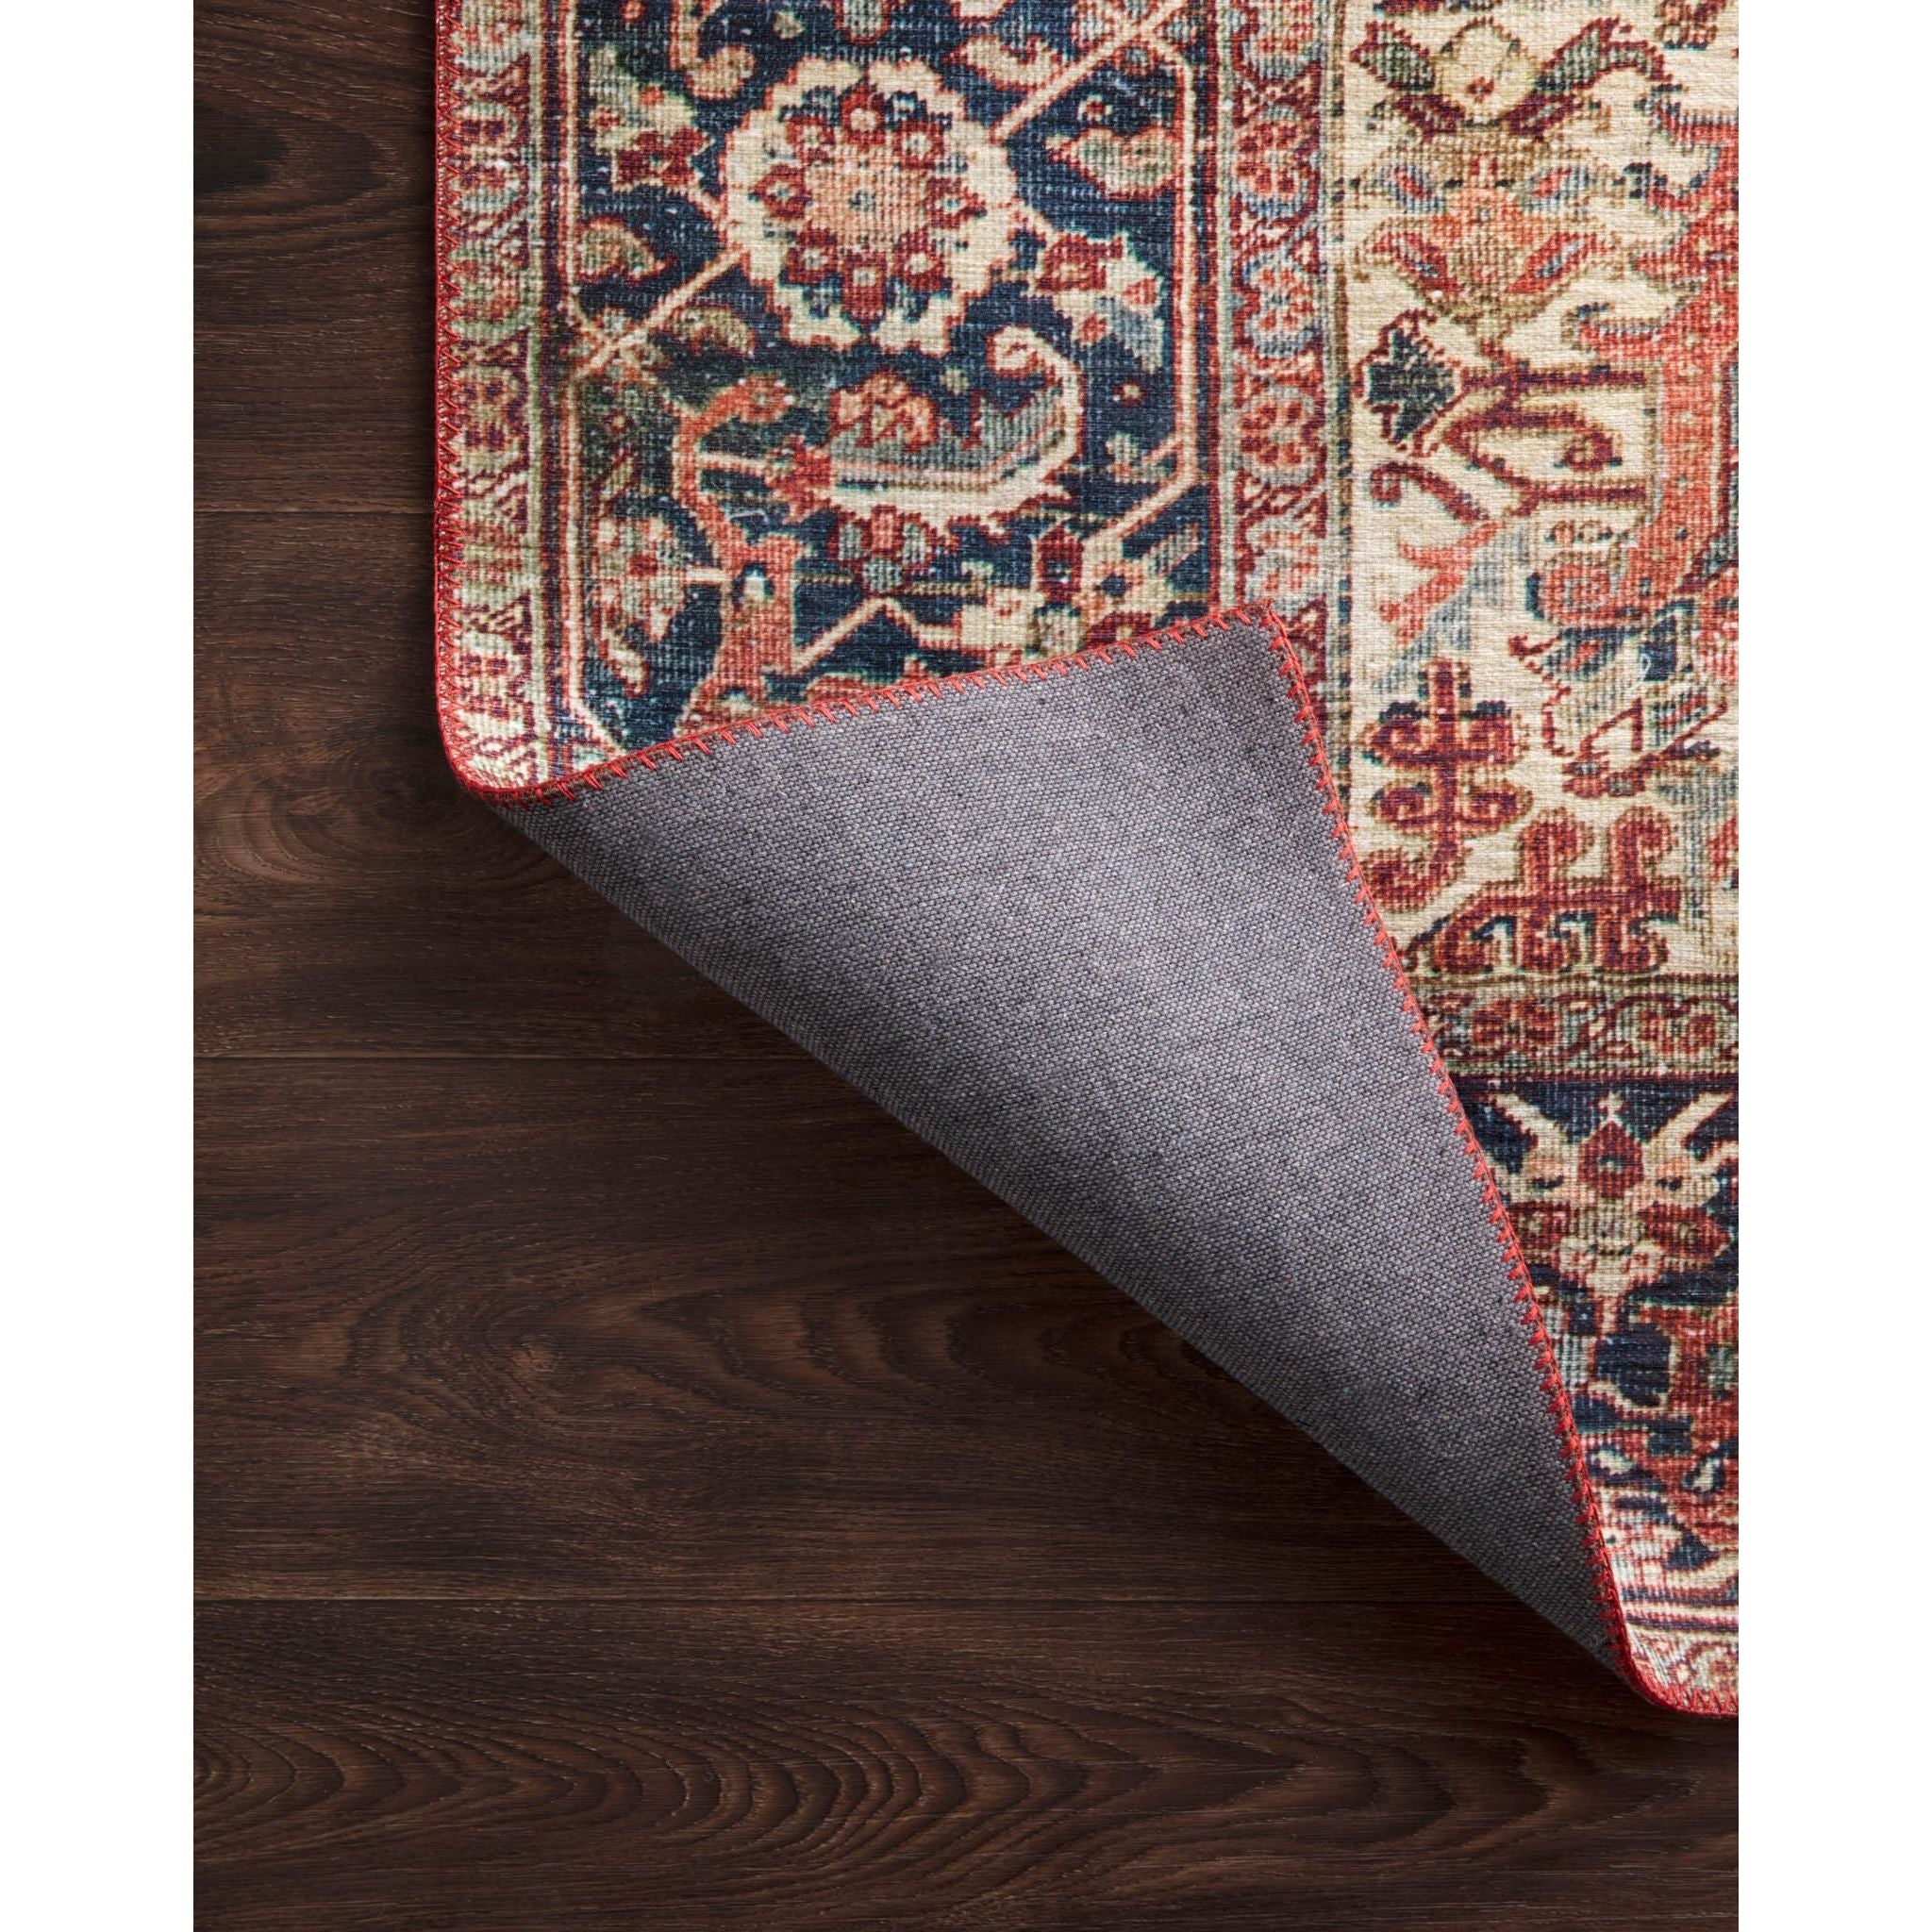 The Layla rug collection from Loloi is traditional and timeless, with a beautiful lived-in design in the spirit of an old-world rug. The Layla Red/Navy area rug is power-loomed of 100% polyester for heavy foot traffic. The rug is a classic with a sophisticated and subtle patina in red, navy, blue, and ivory.